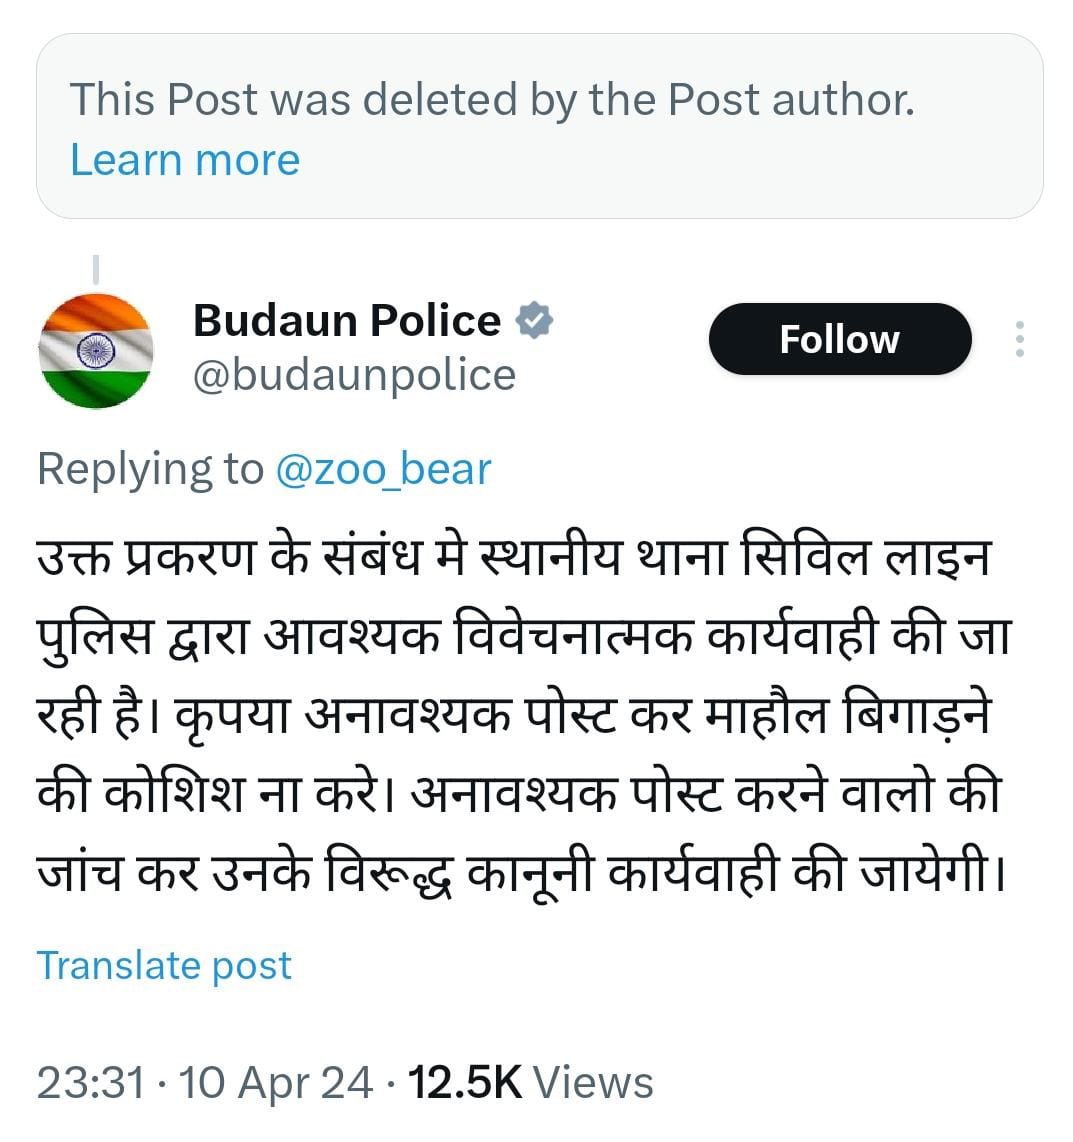 So @zoo_bear has silently deleted his fake tweet and fled after getting belt treatment from @budaunpolice . Action should be taken against this habitual offender for intentionally stirring unrest.